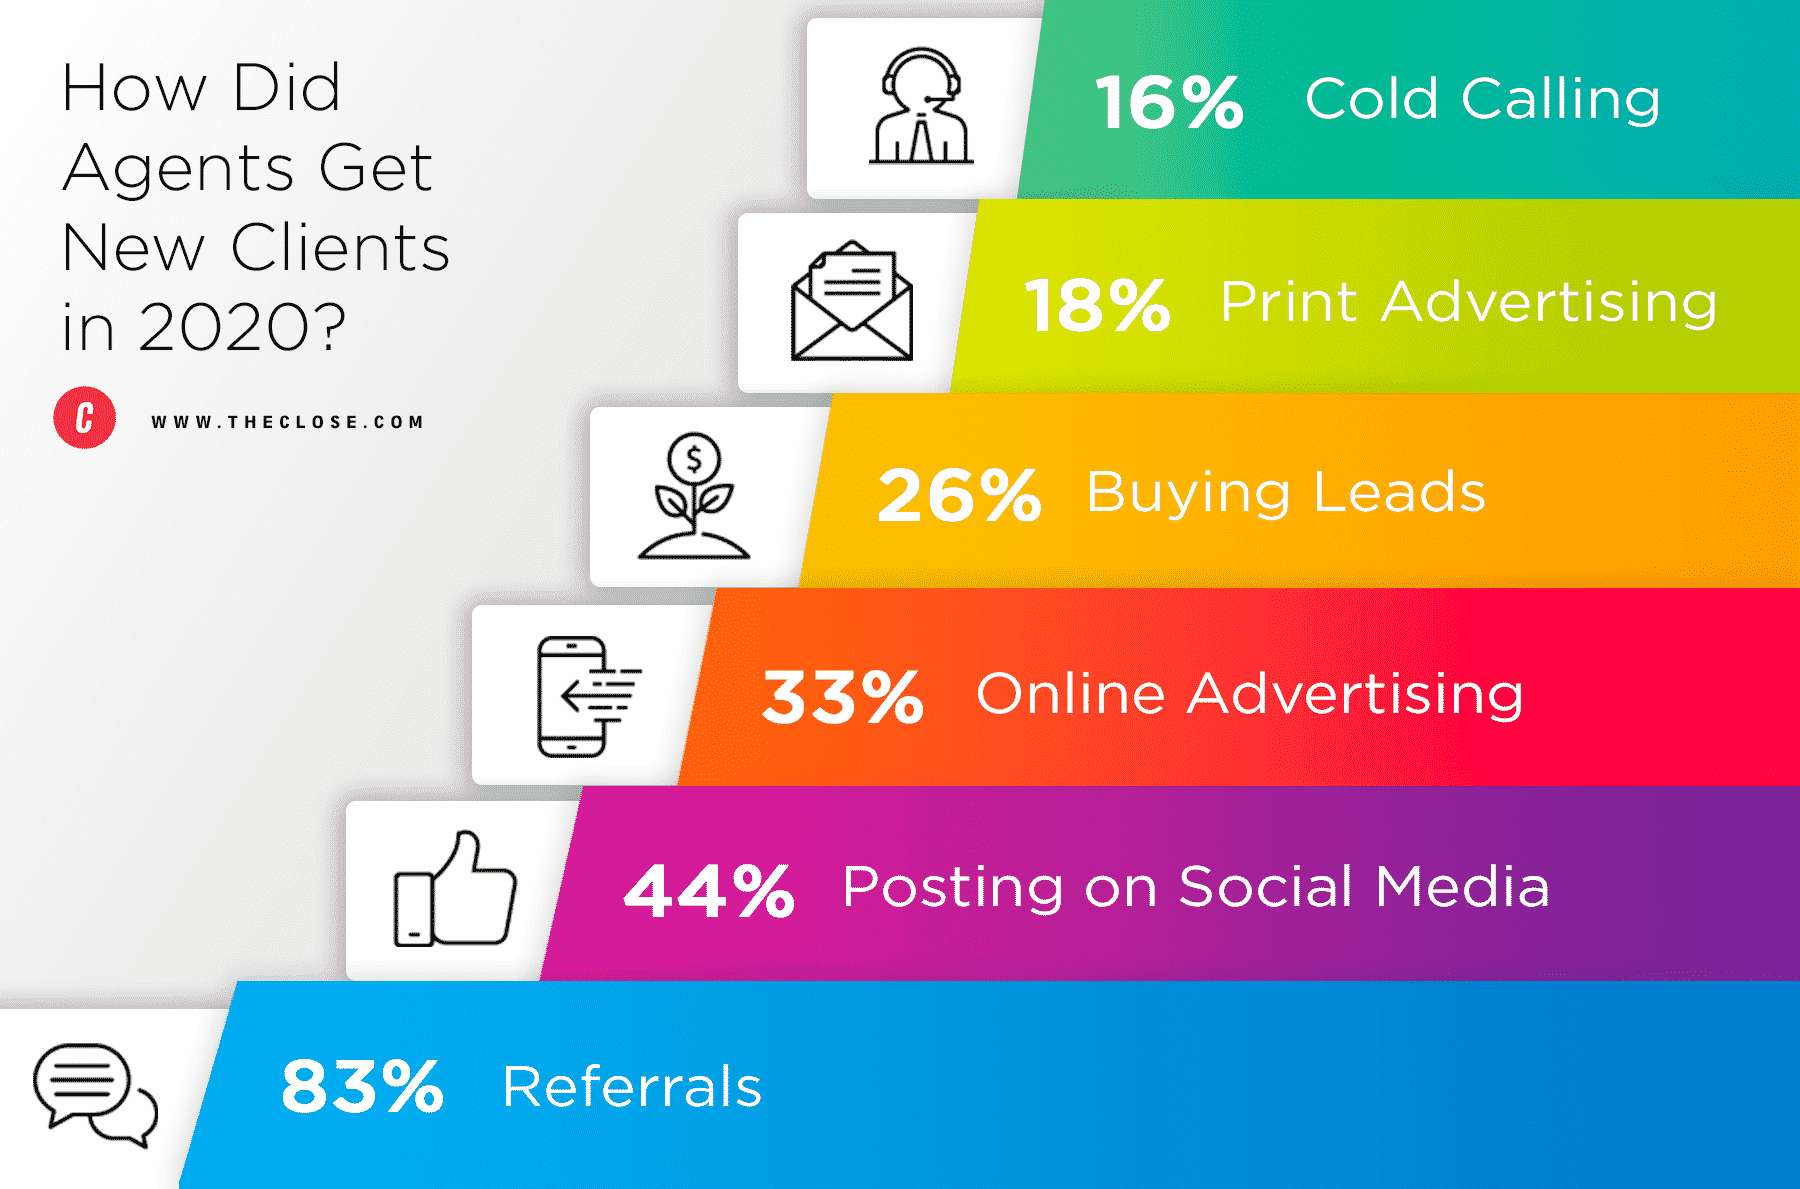 Real Estate Agents are Prioritizing Social Media Over Email in 2021